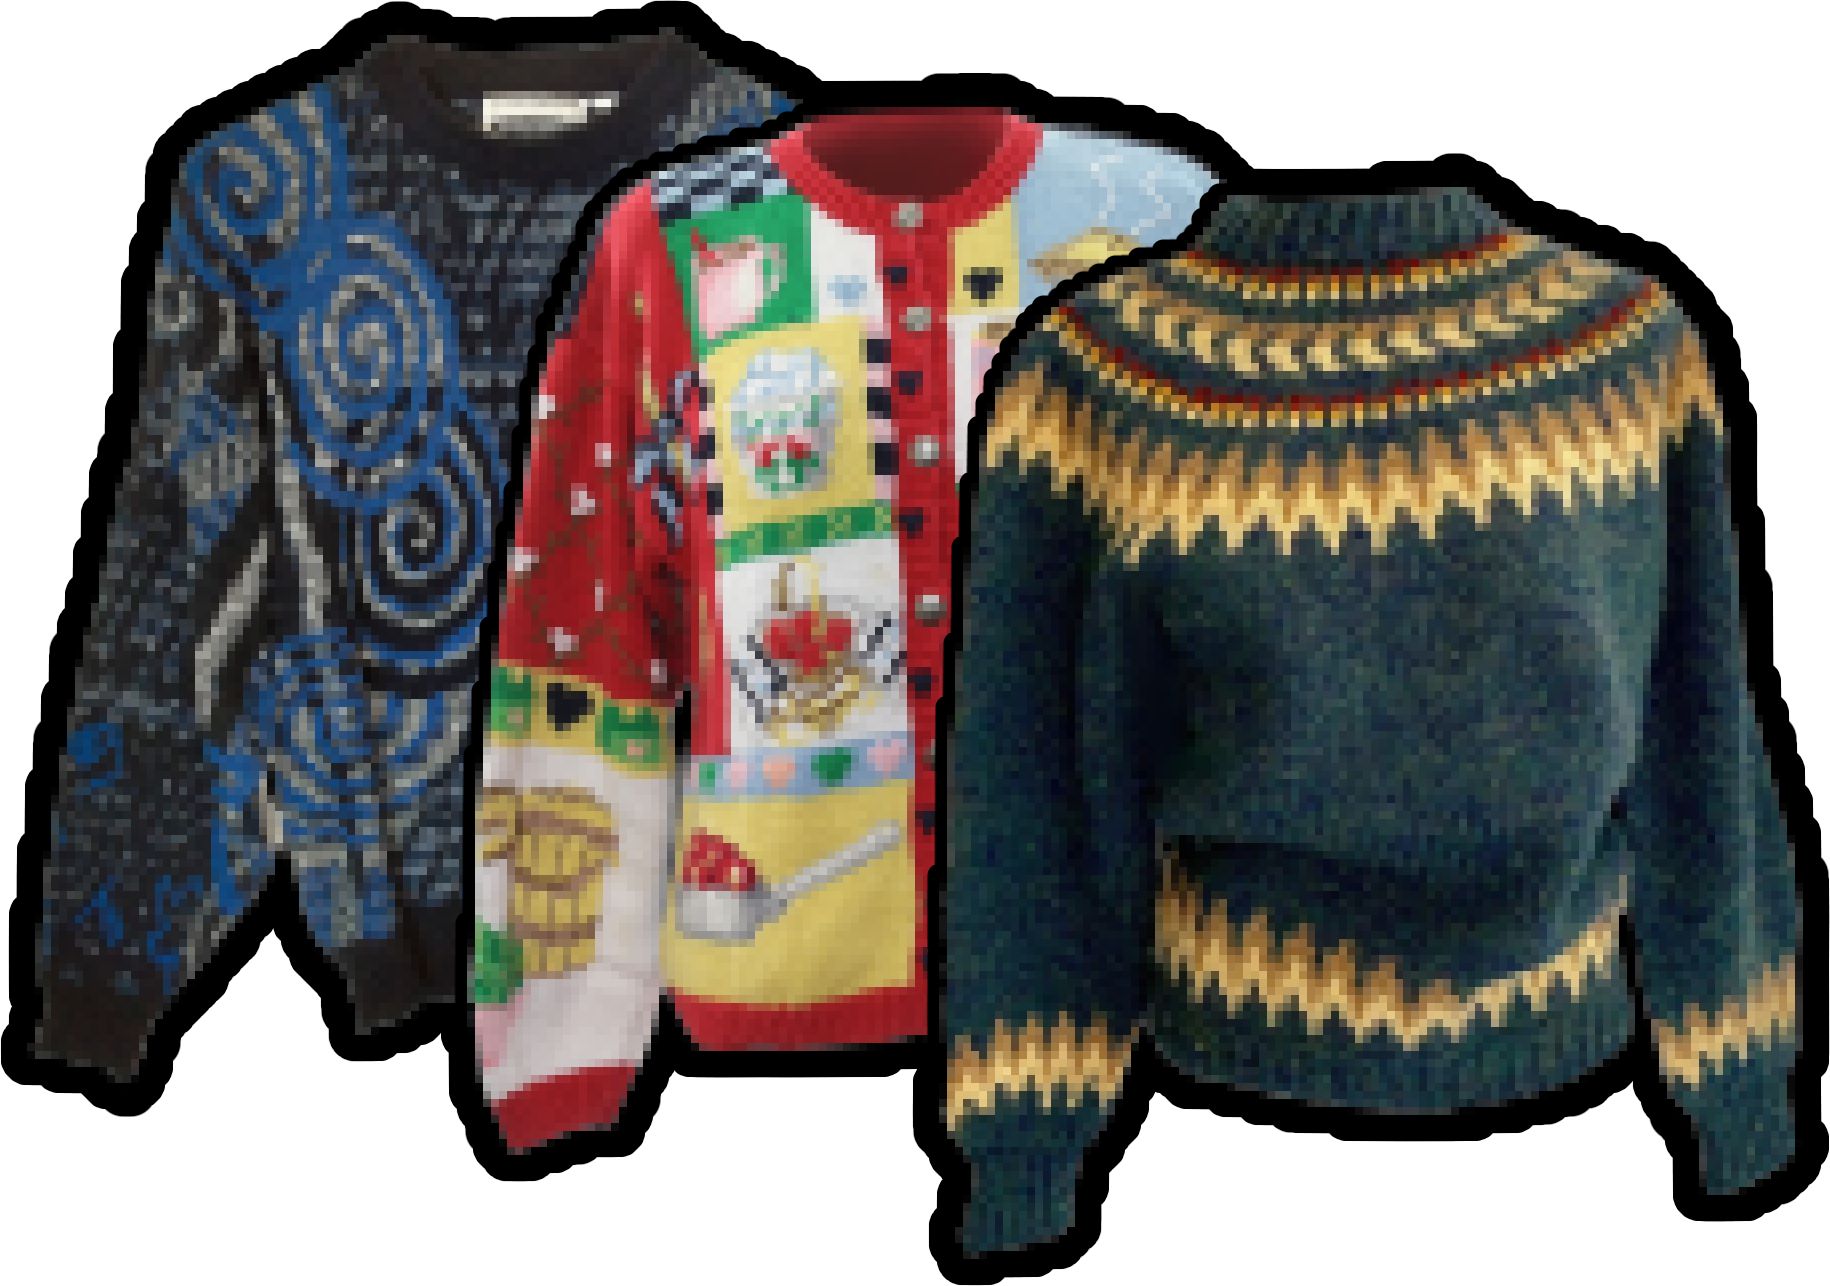 A line-up of three pixelated sweaters. The first sweater is grey and black with blue swirls. The second is patterned like a quilt, featuring pictures of things like pies against baby blue backgrounds and checkers. The final sweater is a dark green, and has yellow and mustard colored zigzags across the collar and sleeves.